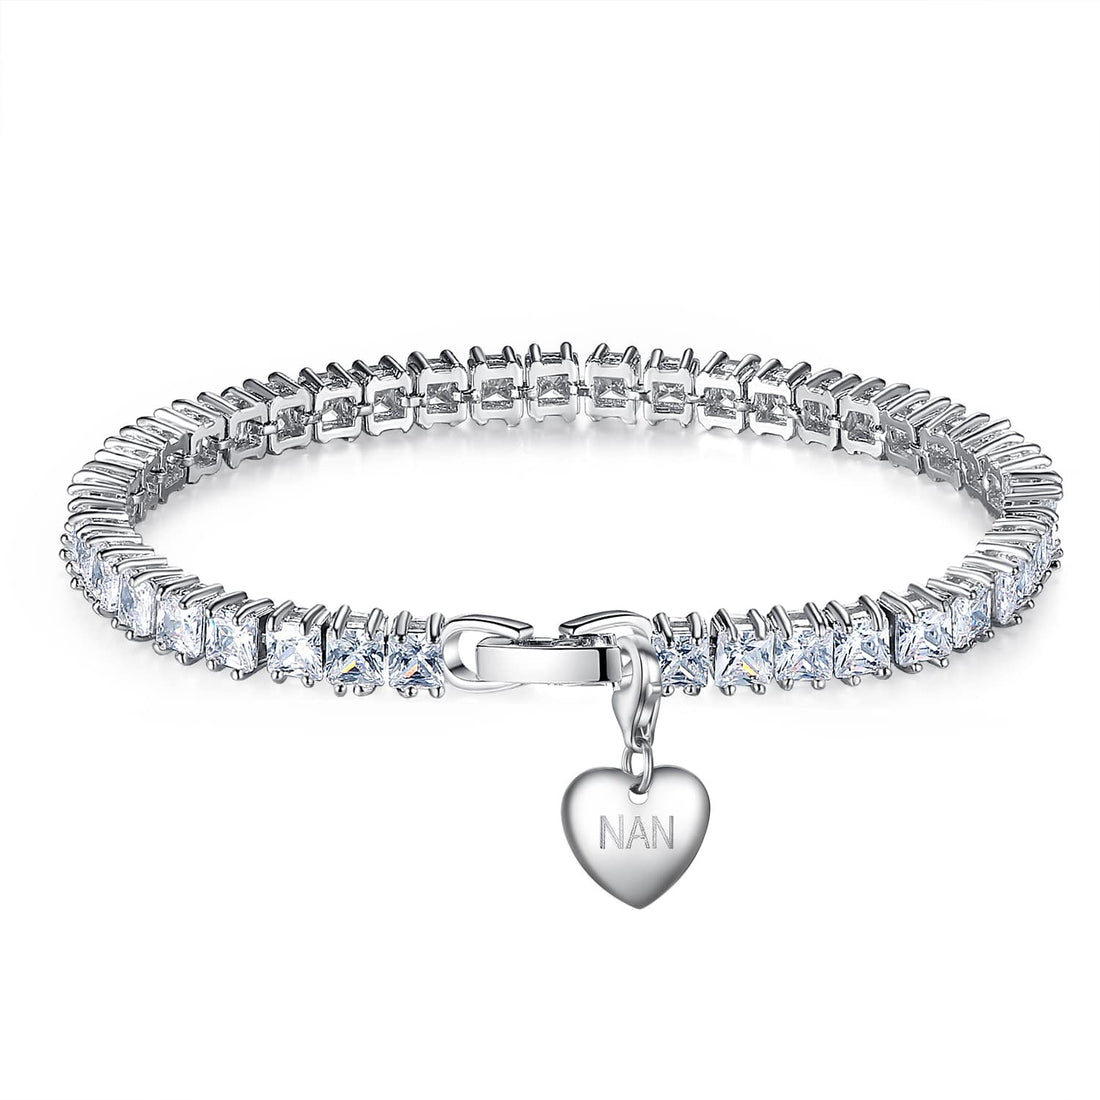 7CT SIMULATED SAPPHIRE RHODIUM PLATED TENNIS BRACELET WITH HEART CHARM